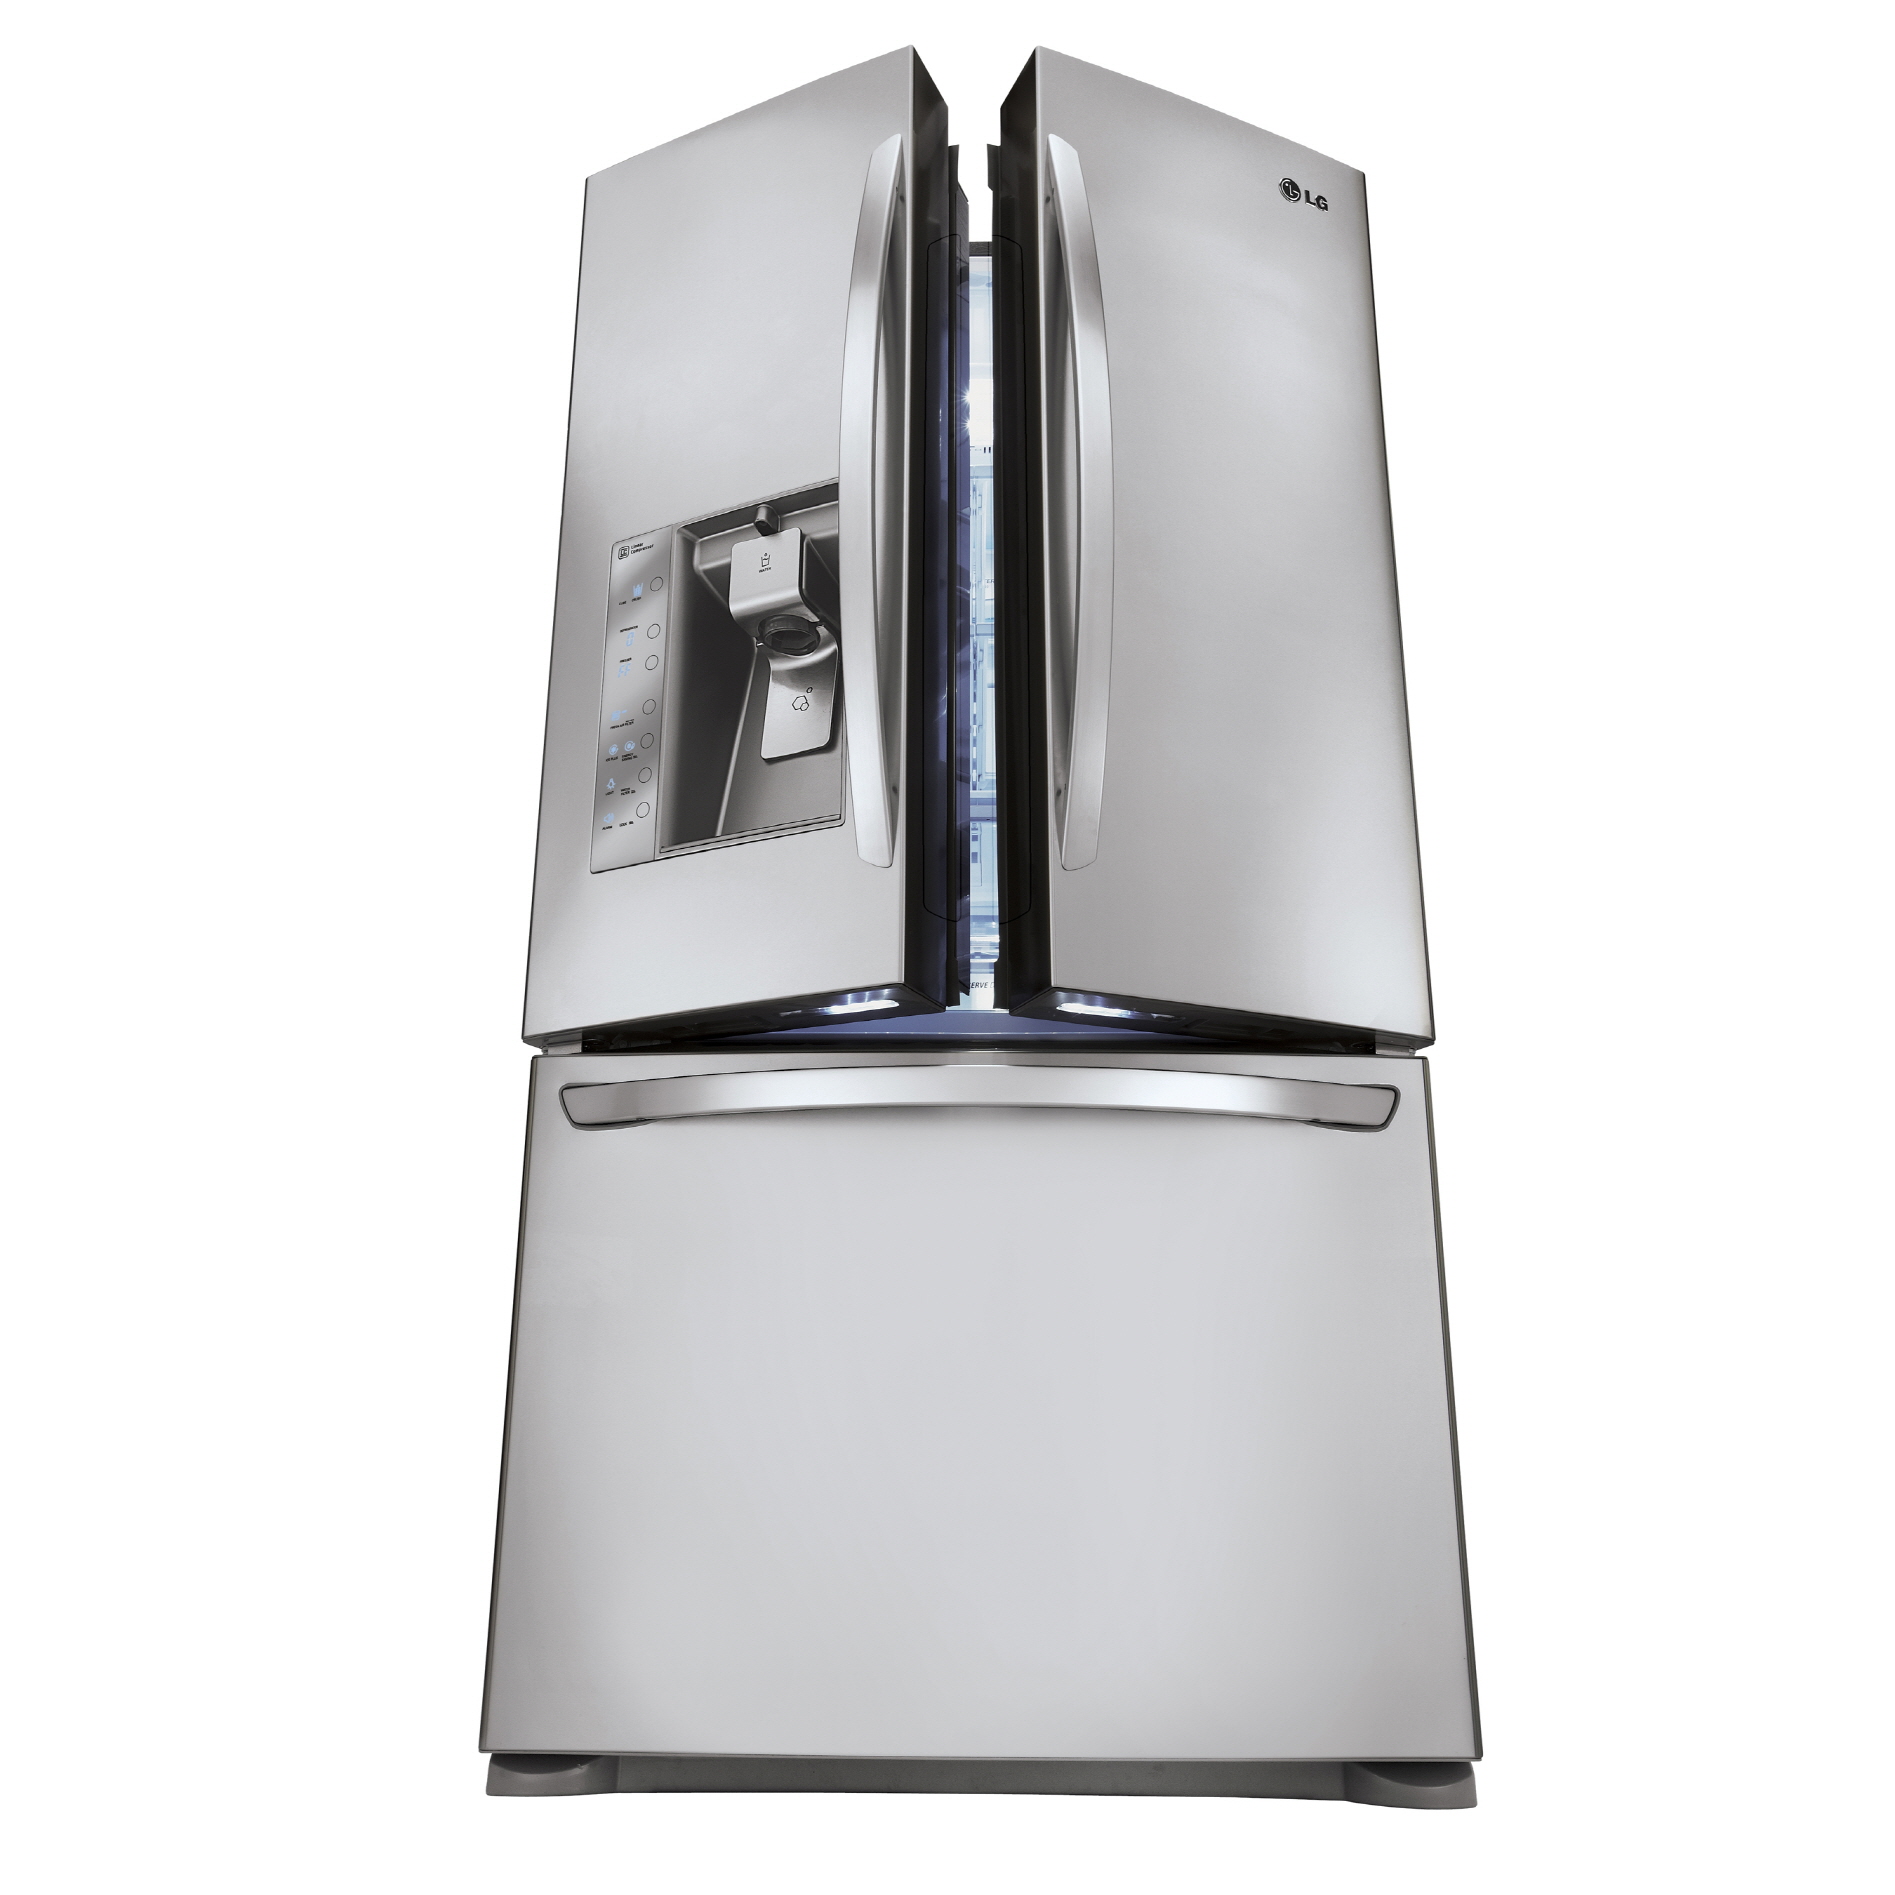 A picture of the LG French-door refrigerator (model LFX31935) opened up at an angle of approximately 15 degrees